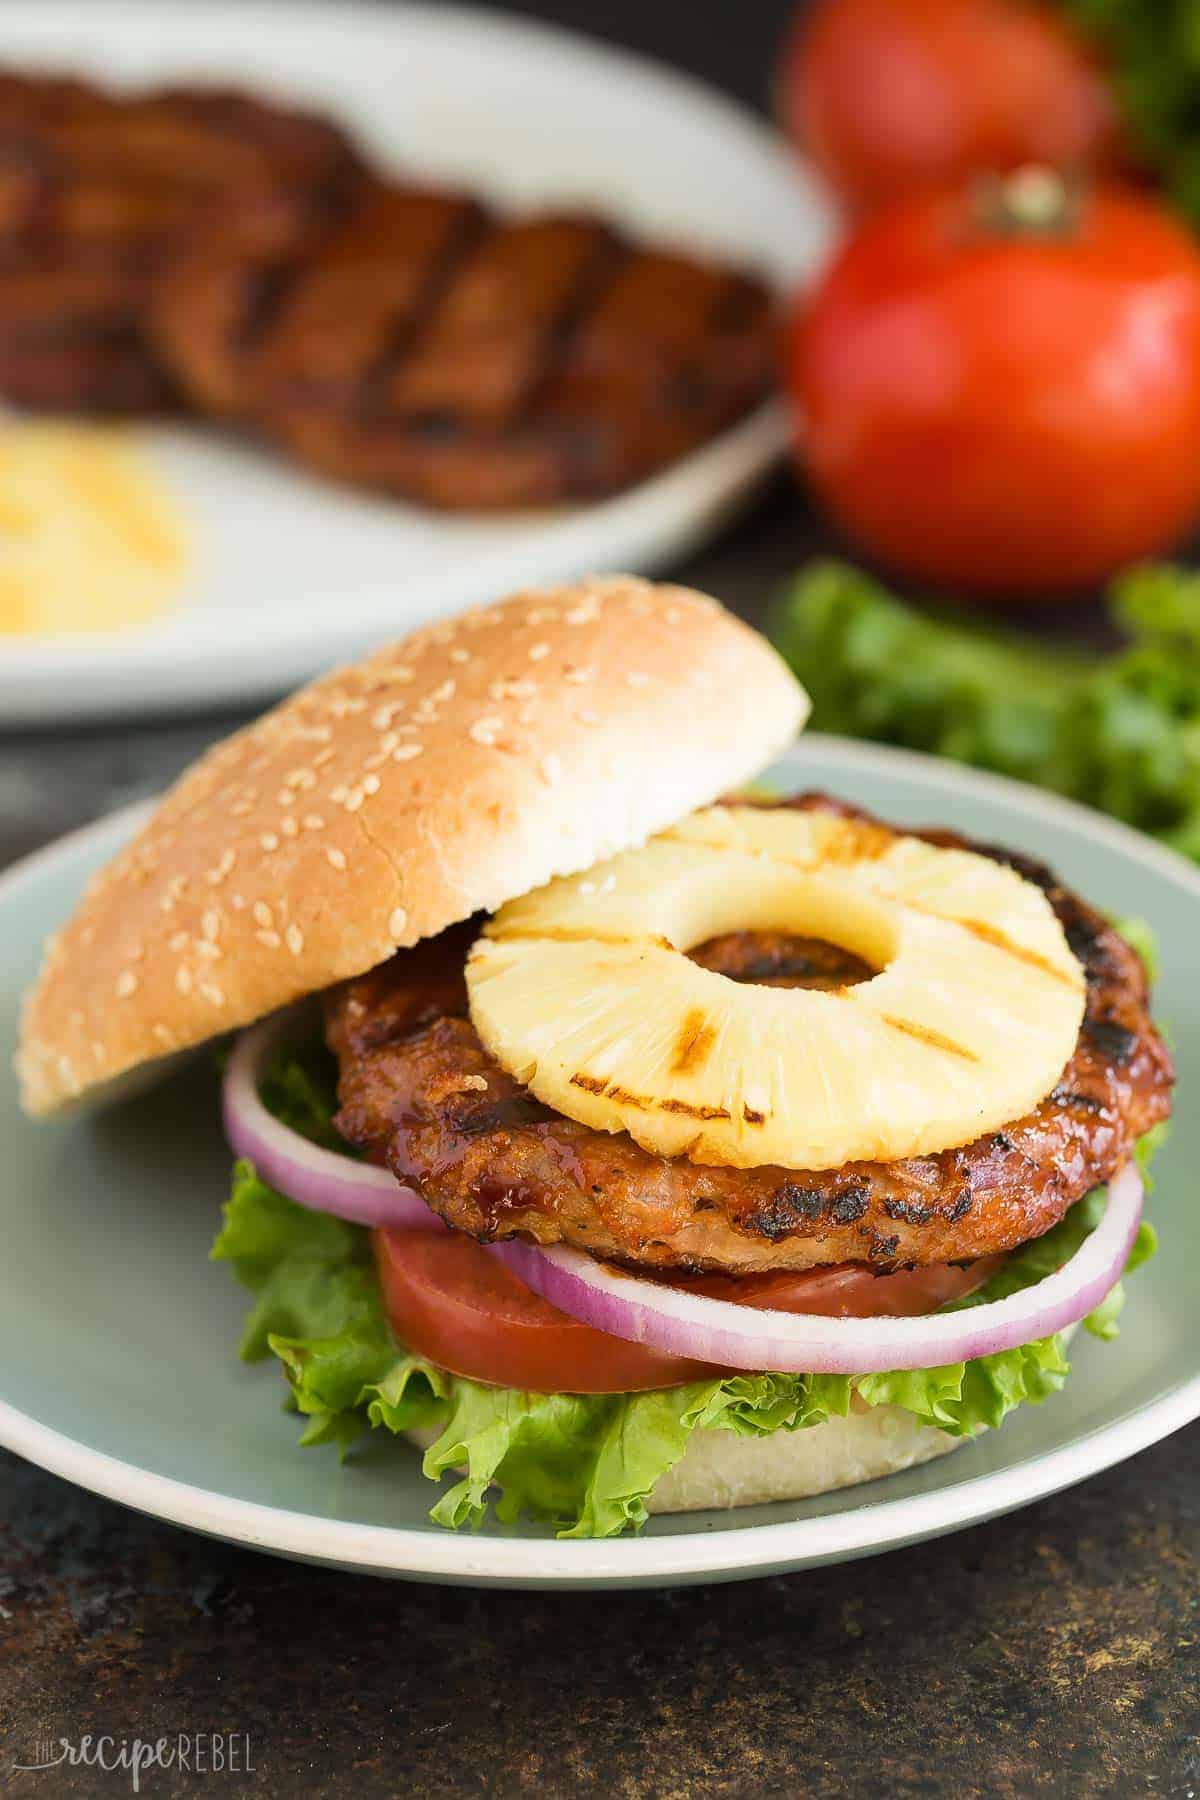 Hawaiian Chicken Burgers with Grilled Pineapple are an easy, healthy dinner recipe that's perfect for summer! Made with just a few simple ingredients and easy to make ahead or meal prep. Loaded with sweet and savoury flavours! Includes step by step recipe video.